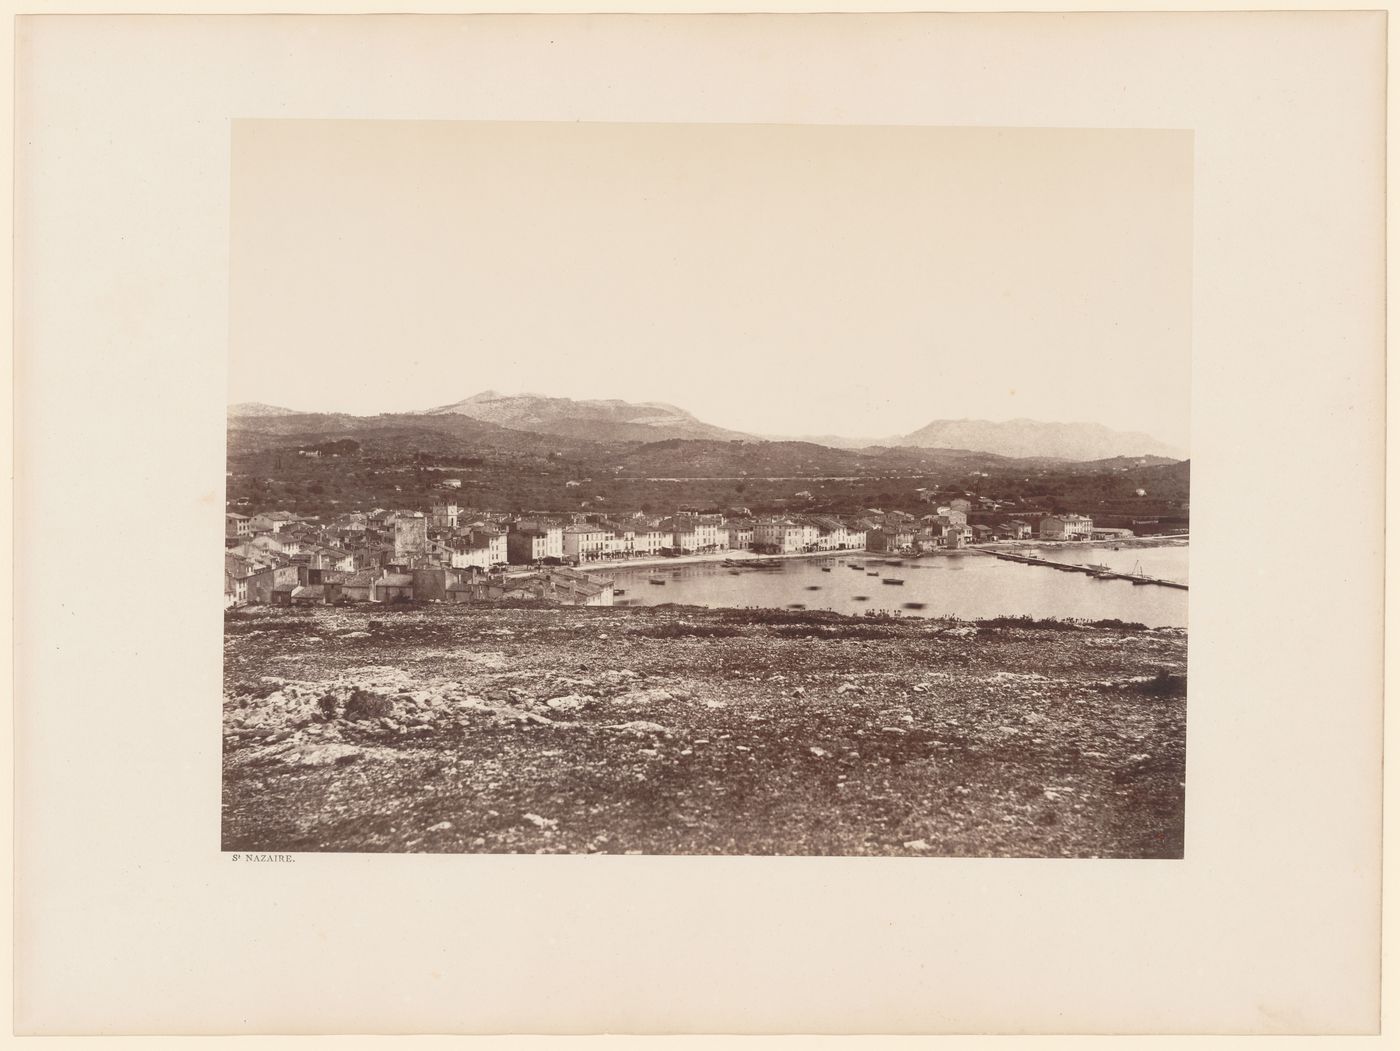 General view of town and harbor, and hills beyond, Saint-Nazaire, France